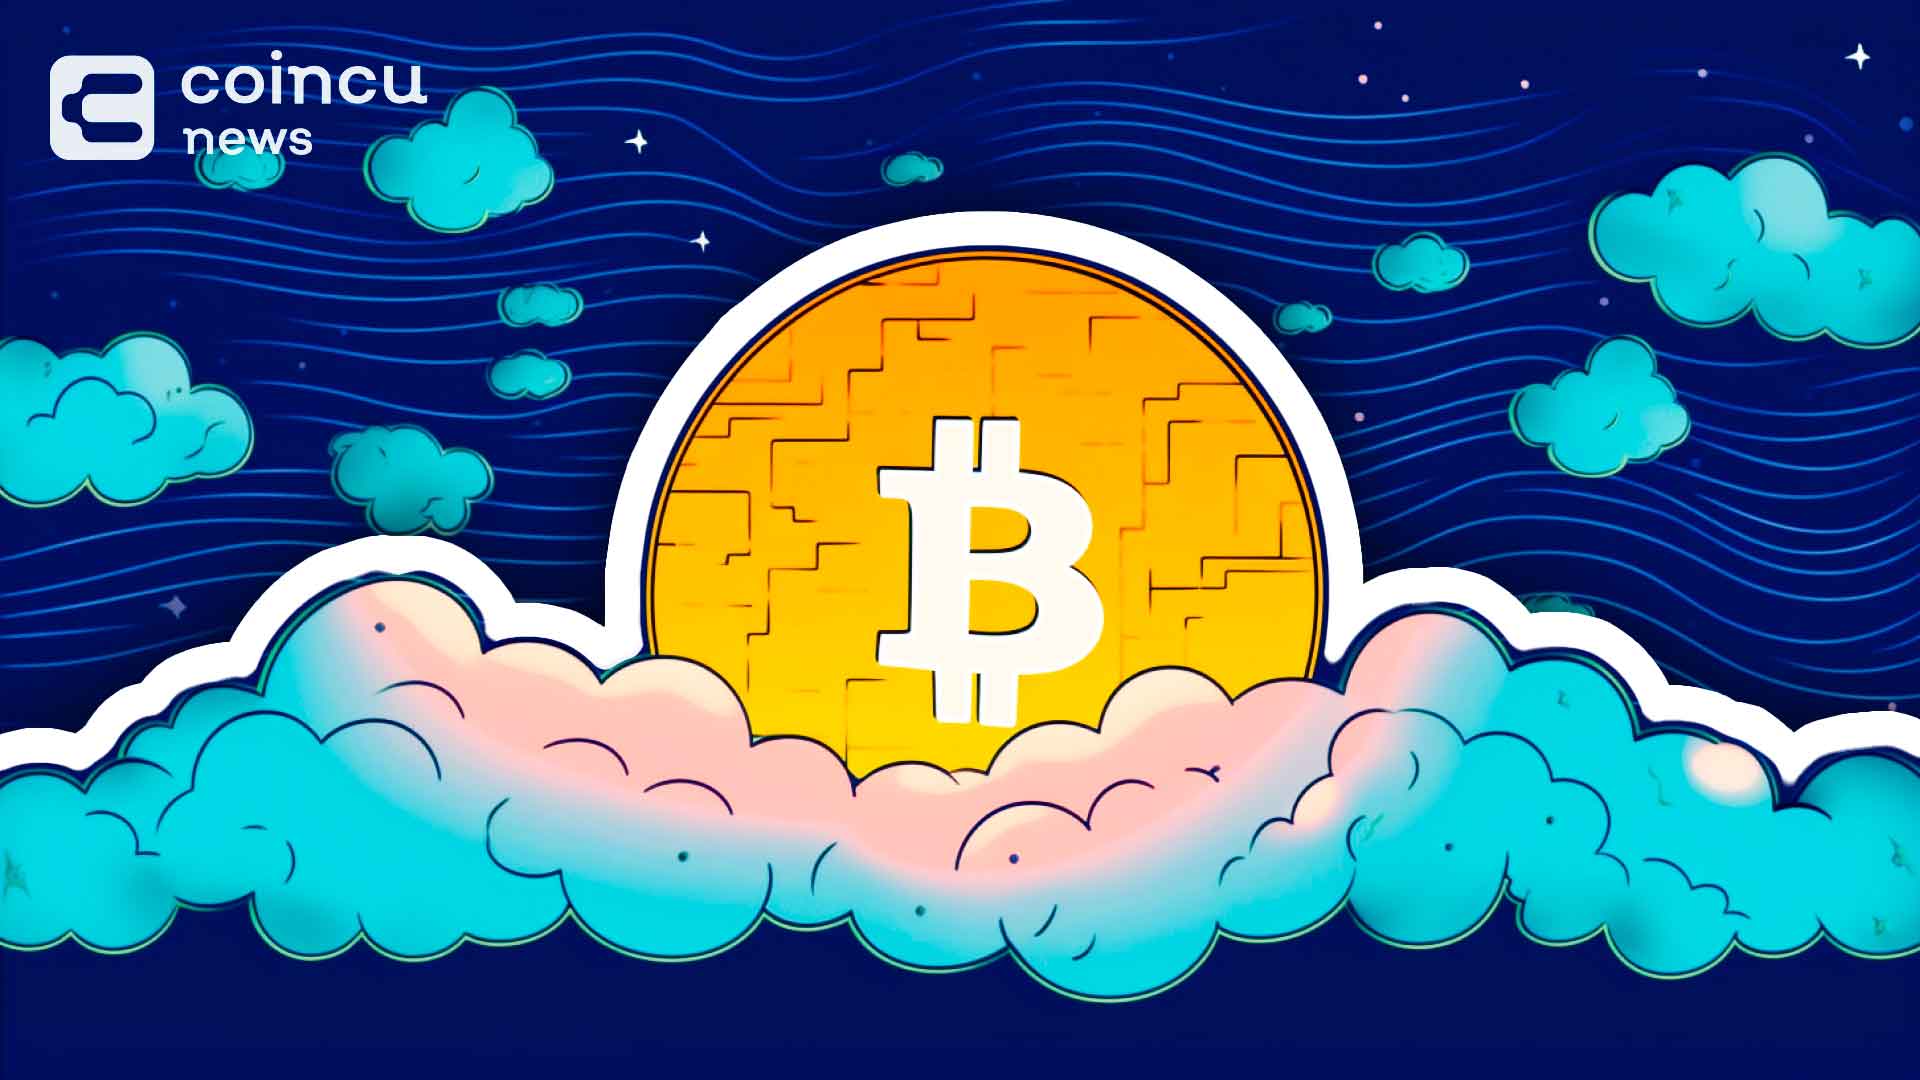 Monthly Bitcoin Price Reaches Highest Increase Since 2020